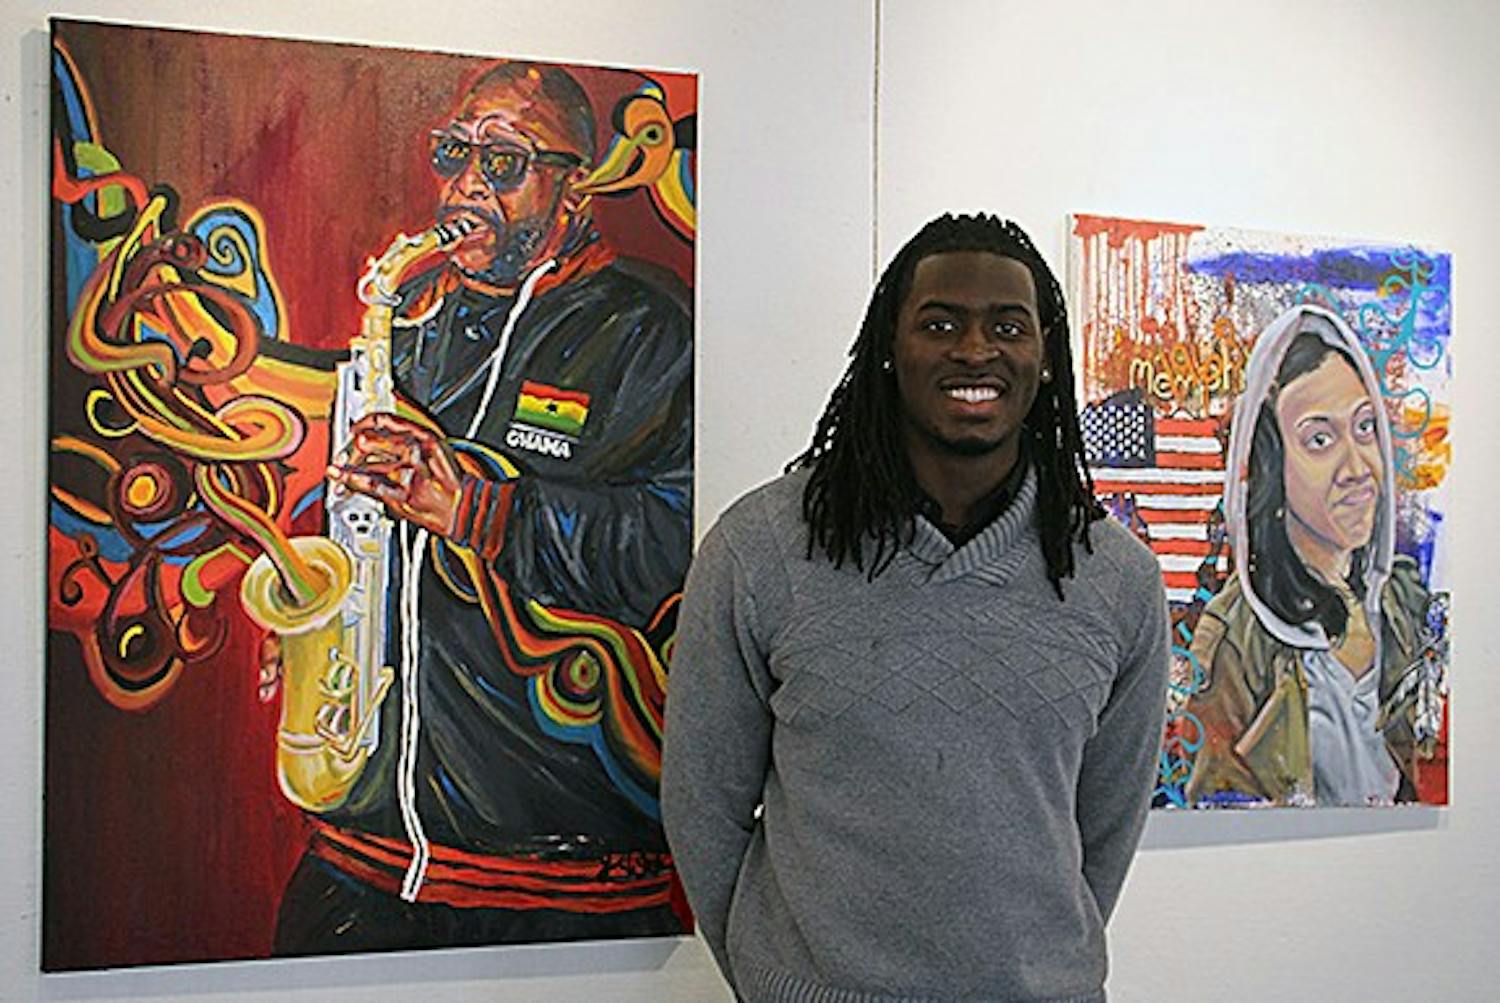 Lamar Whidbee, a graduate of NC Central University and originally from Elizabeth City, currently has art on display in the Union Gallery exhibit 'Black Like Me' along with other community artists, including UNC artist Will Thomas. 